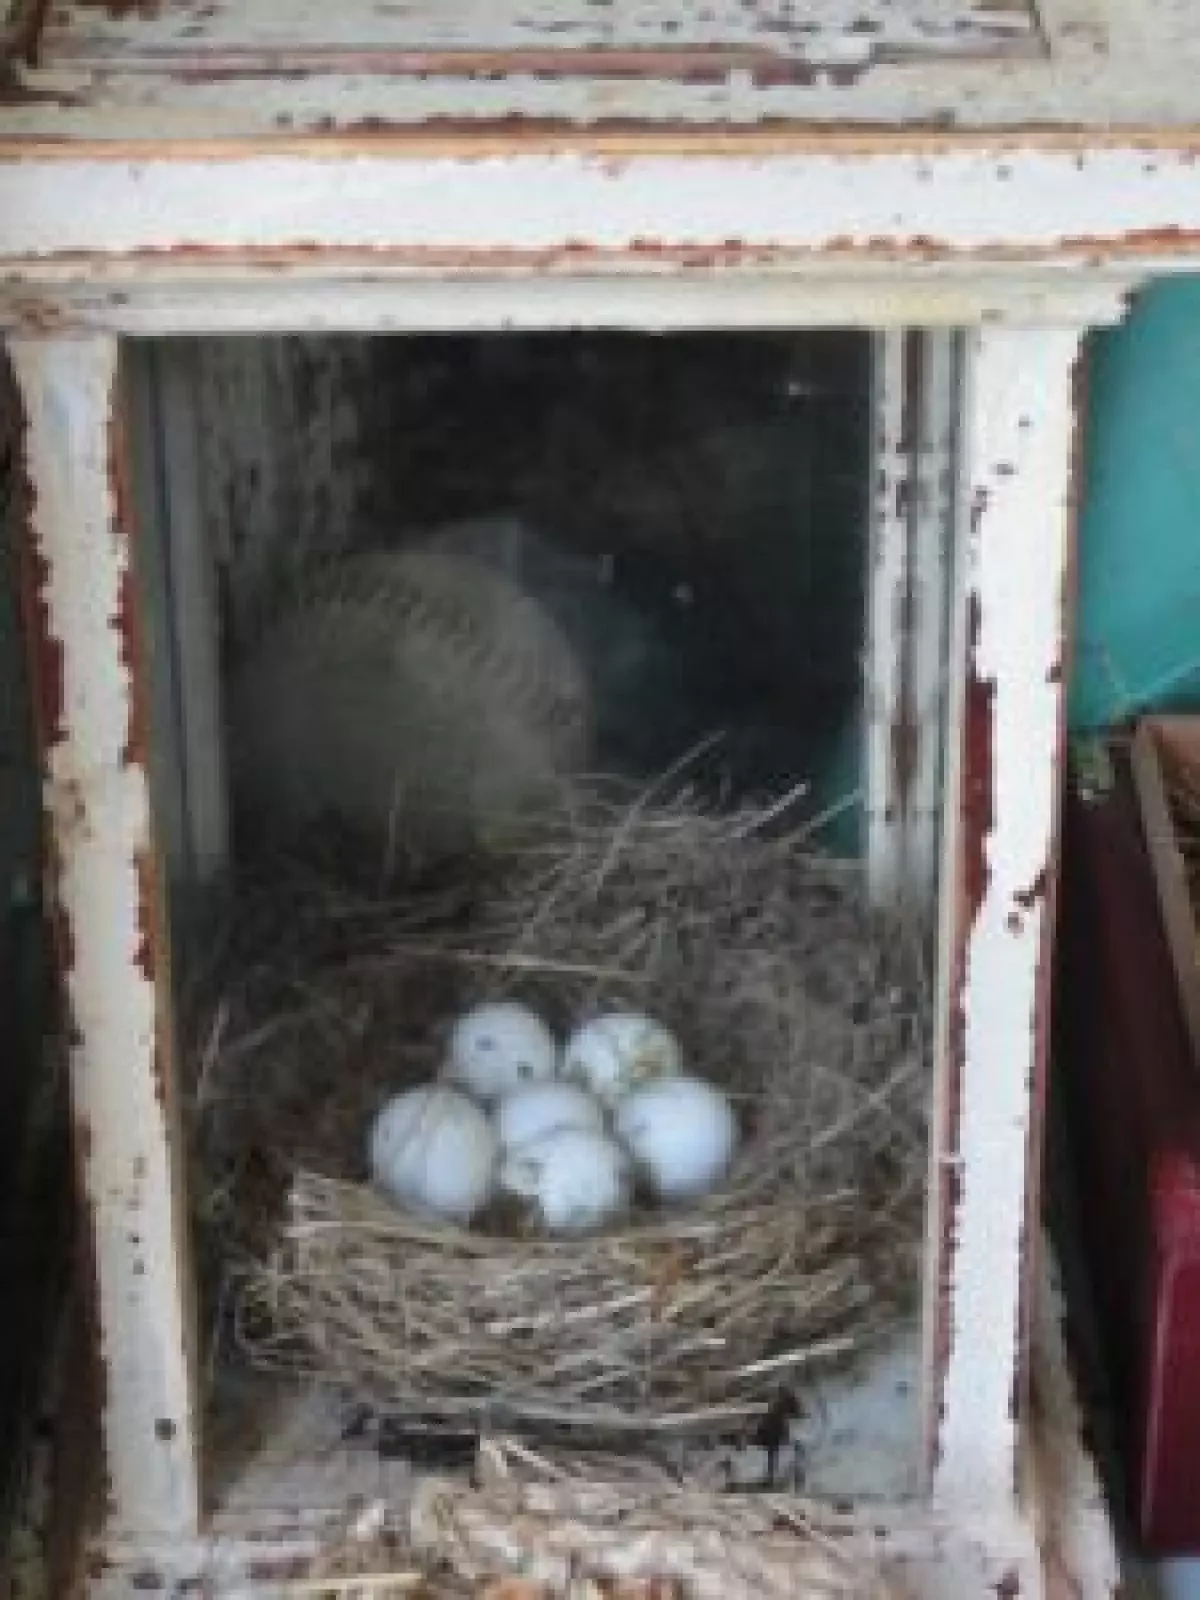 This bird’s nest is a sweet Object of Nature that can beautify any home.